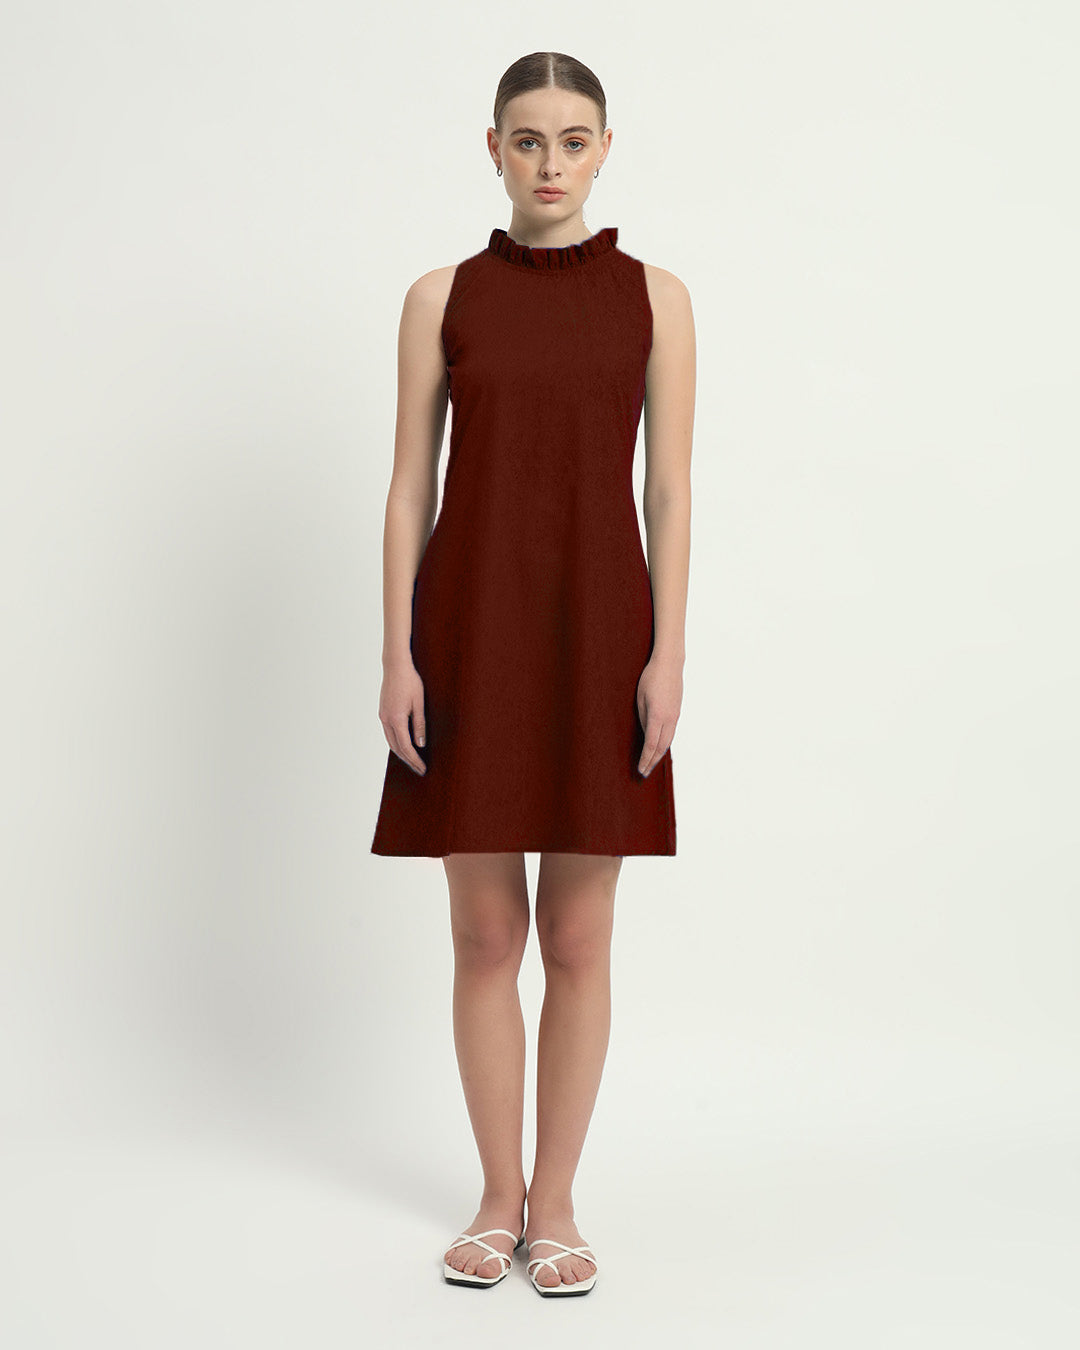 The Rouge Angelica Cotton Dress